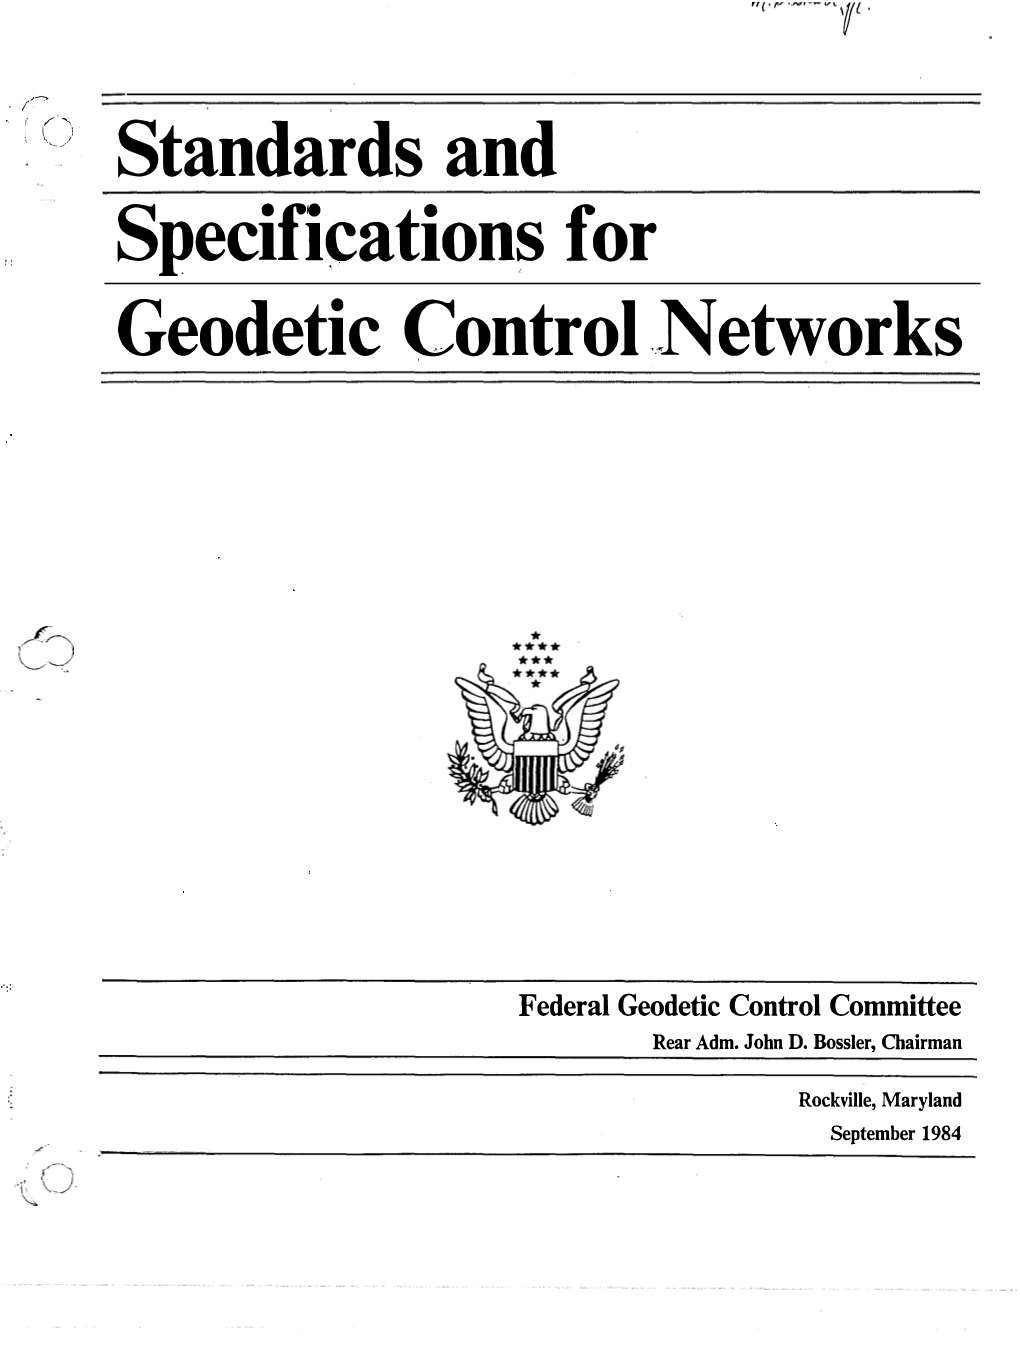 Standards and Specifications for Geodetic Control .Networks